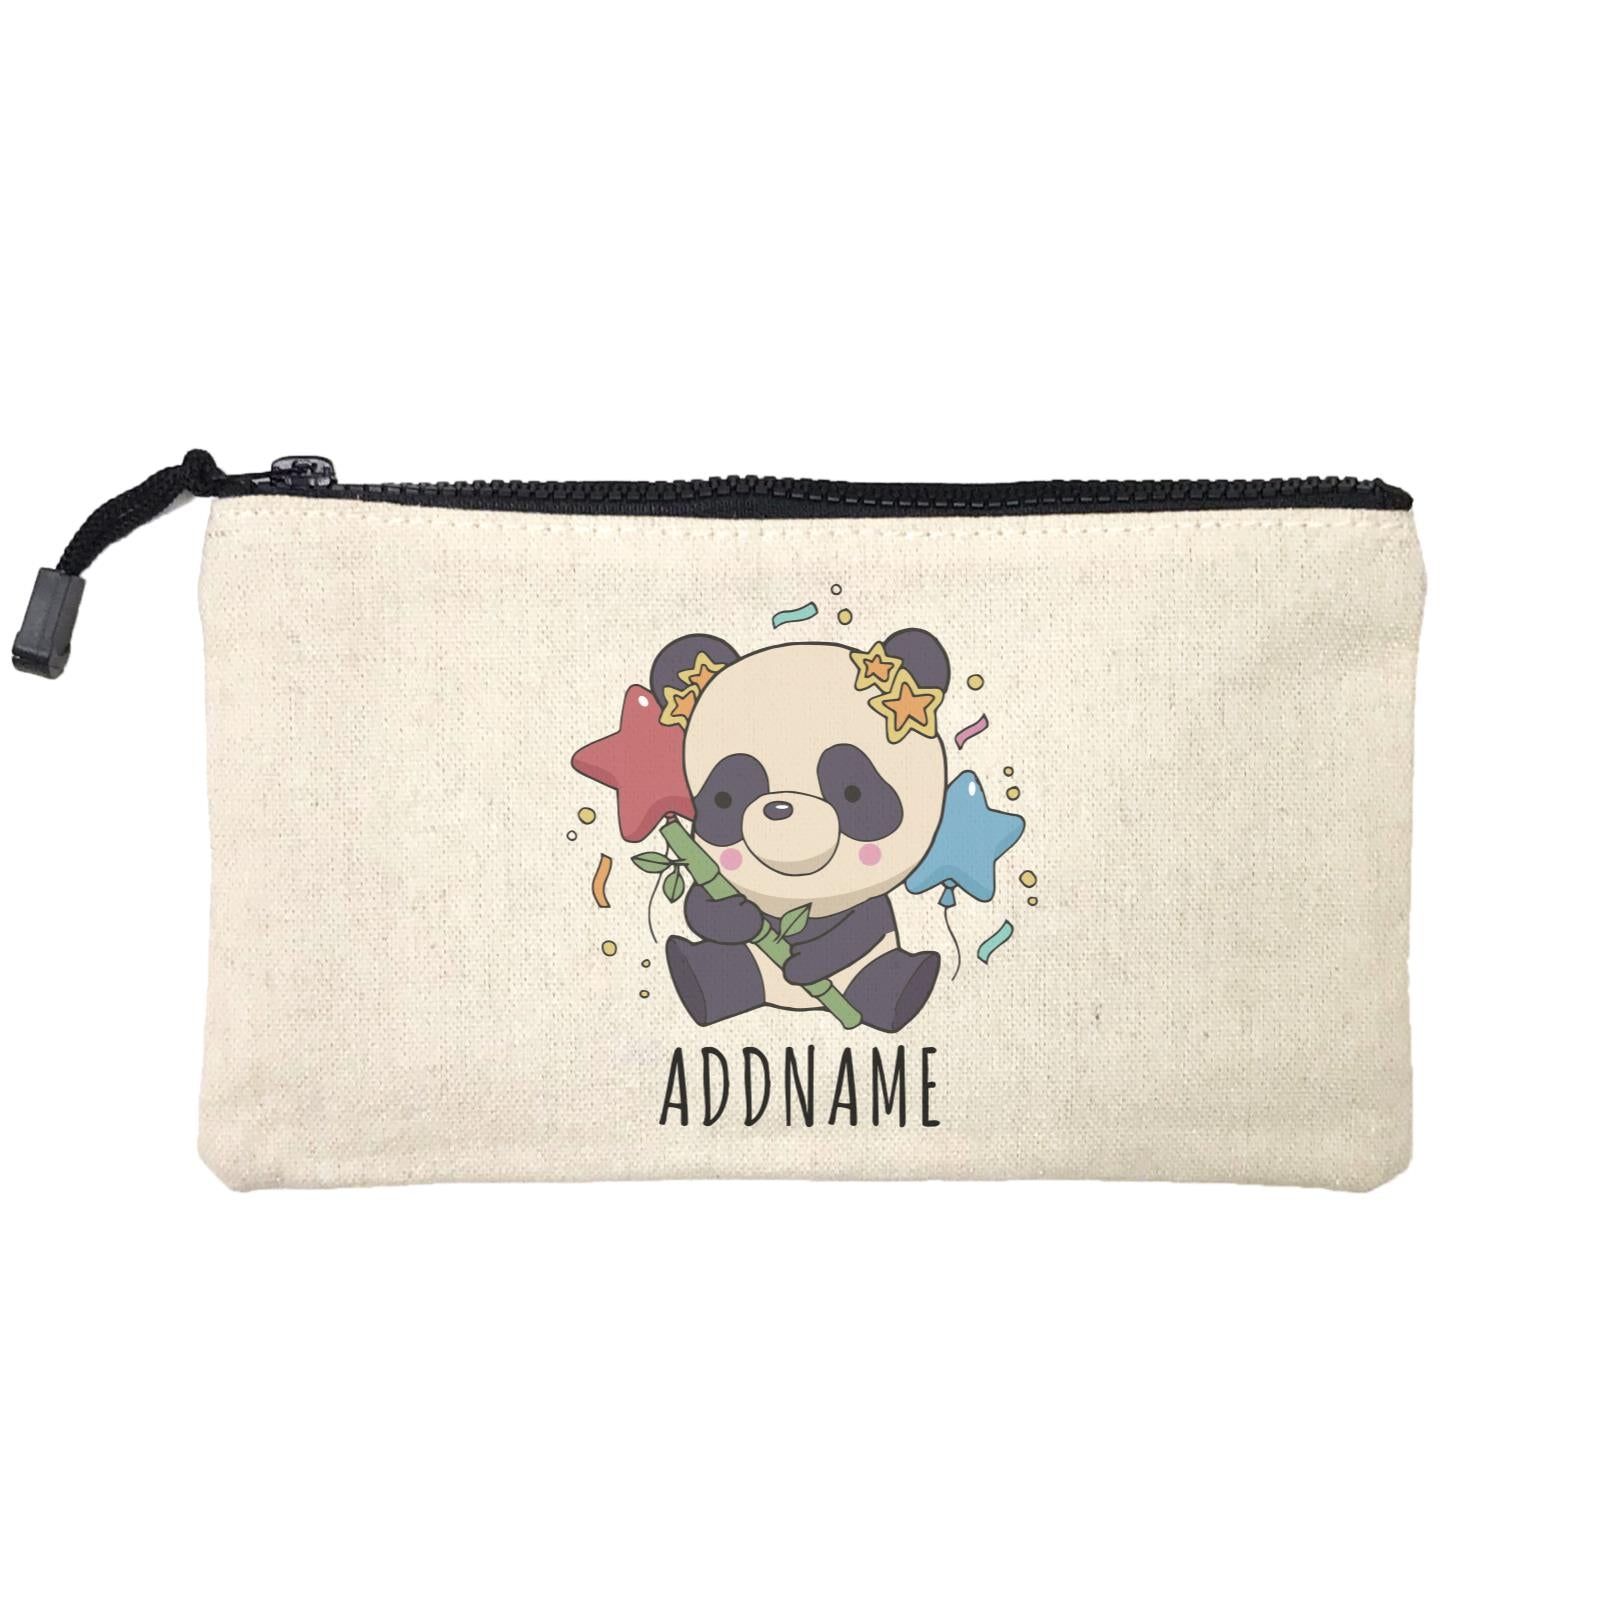 Birthday Sketch Animals Panda with Party Hat Holding Bamboo Addname Mini Accessories Stationery Pouch